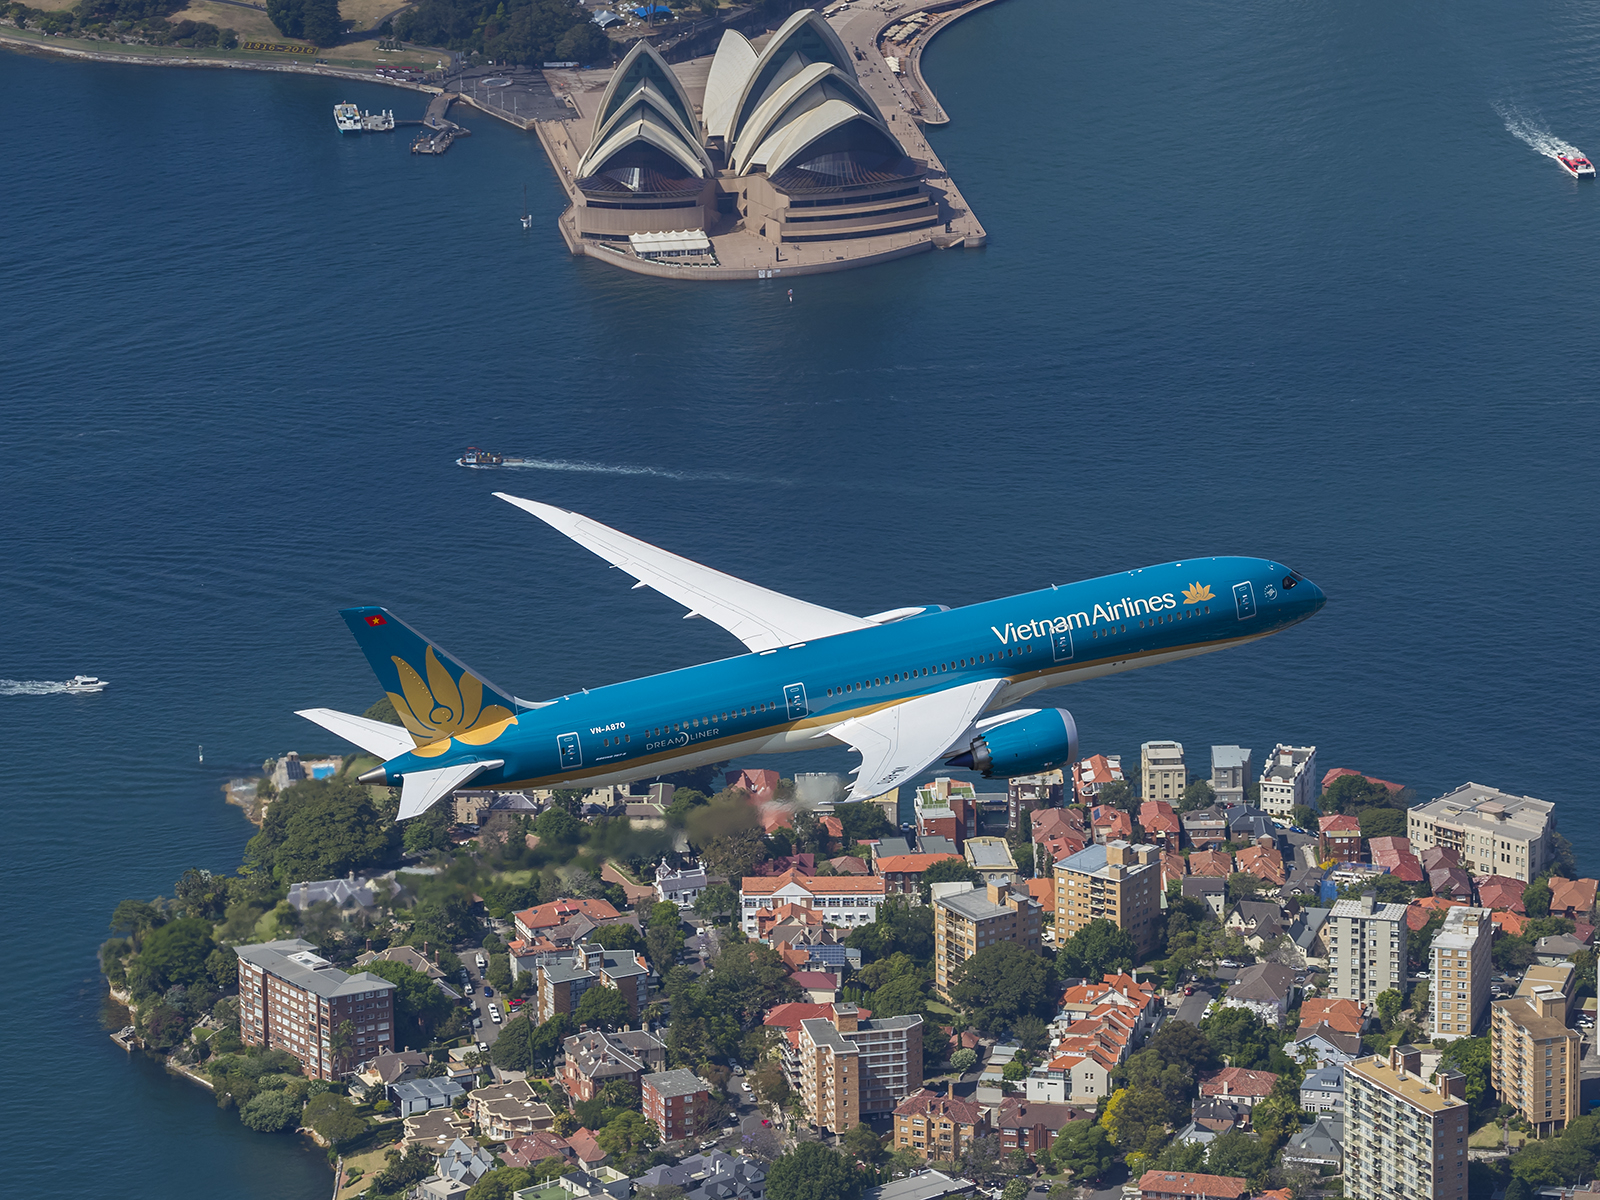 A Vietnam Airlines aircraft flies over Sydney. Photo courtesy of Vietnam Airlines.